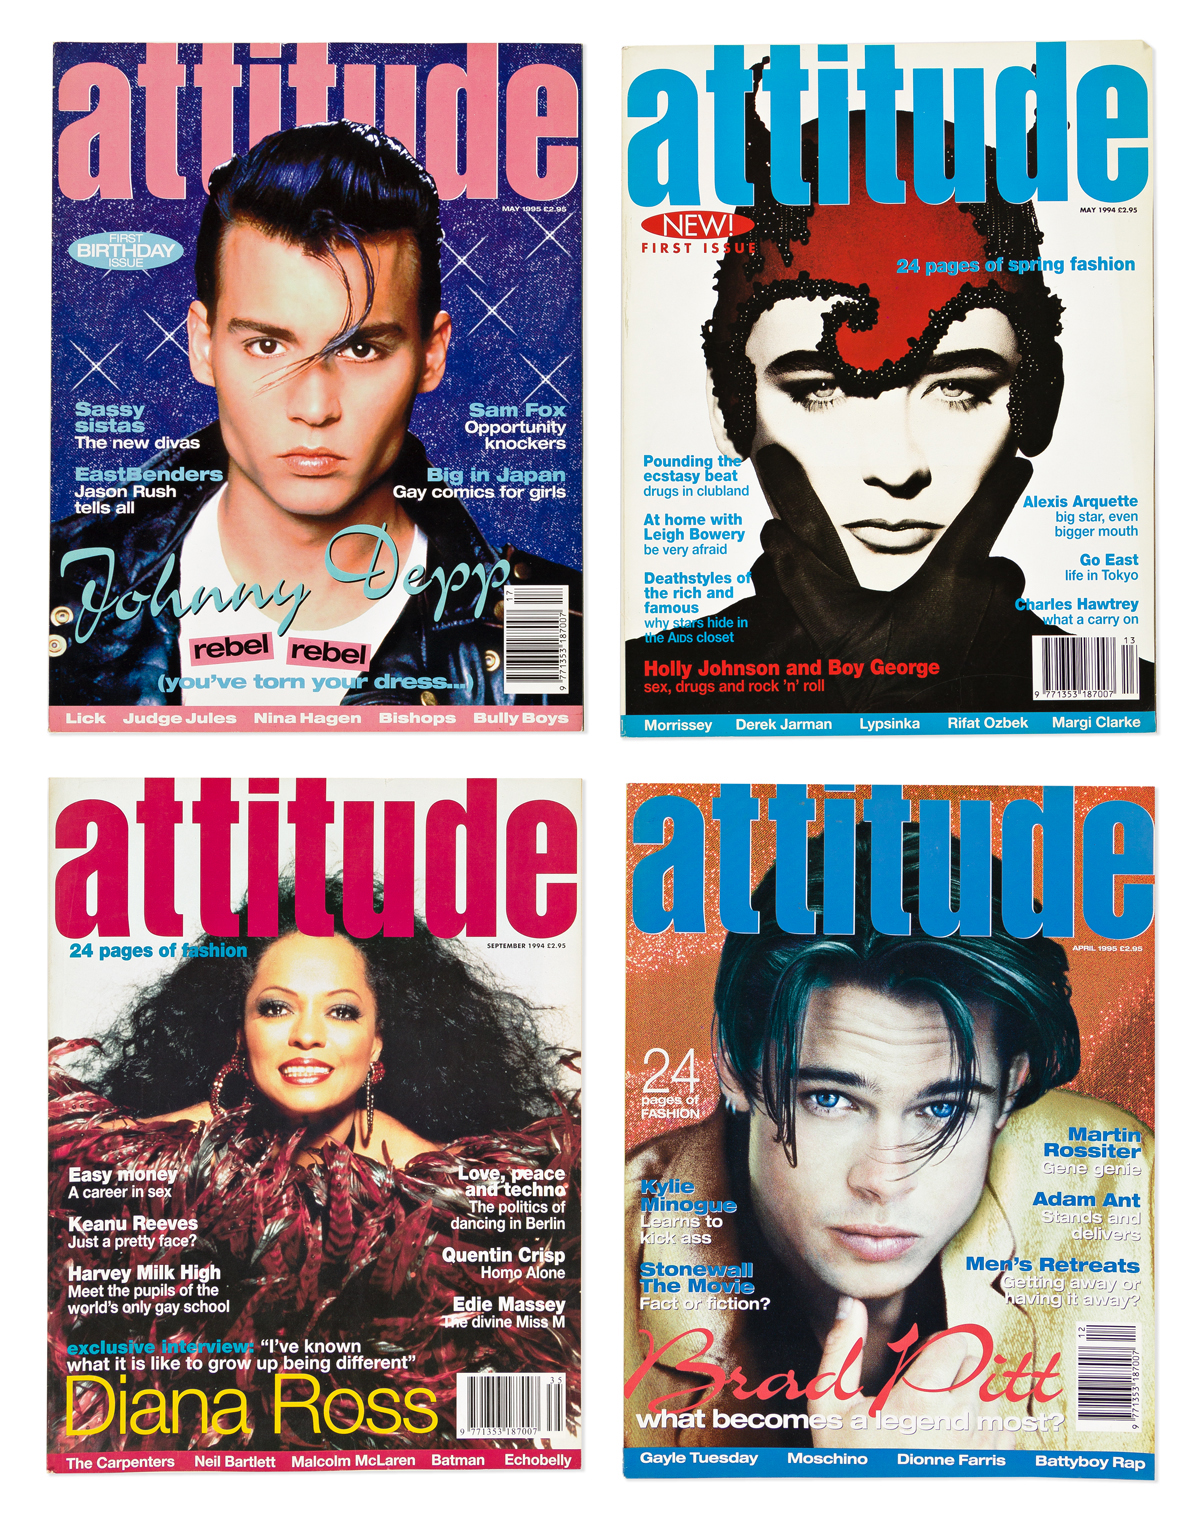 ATTITUDE First 13 issues of the glossy British lifestyle magazine.